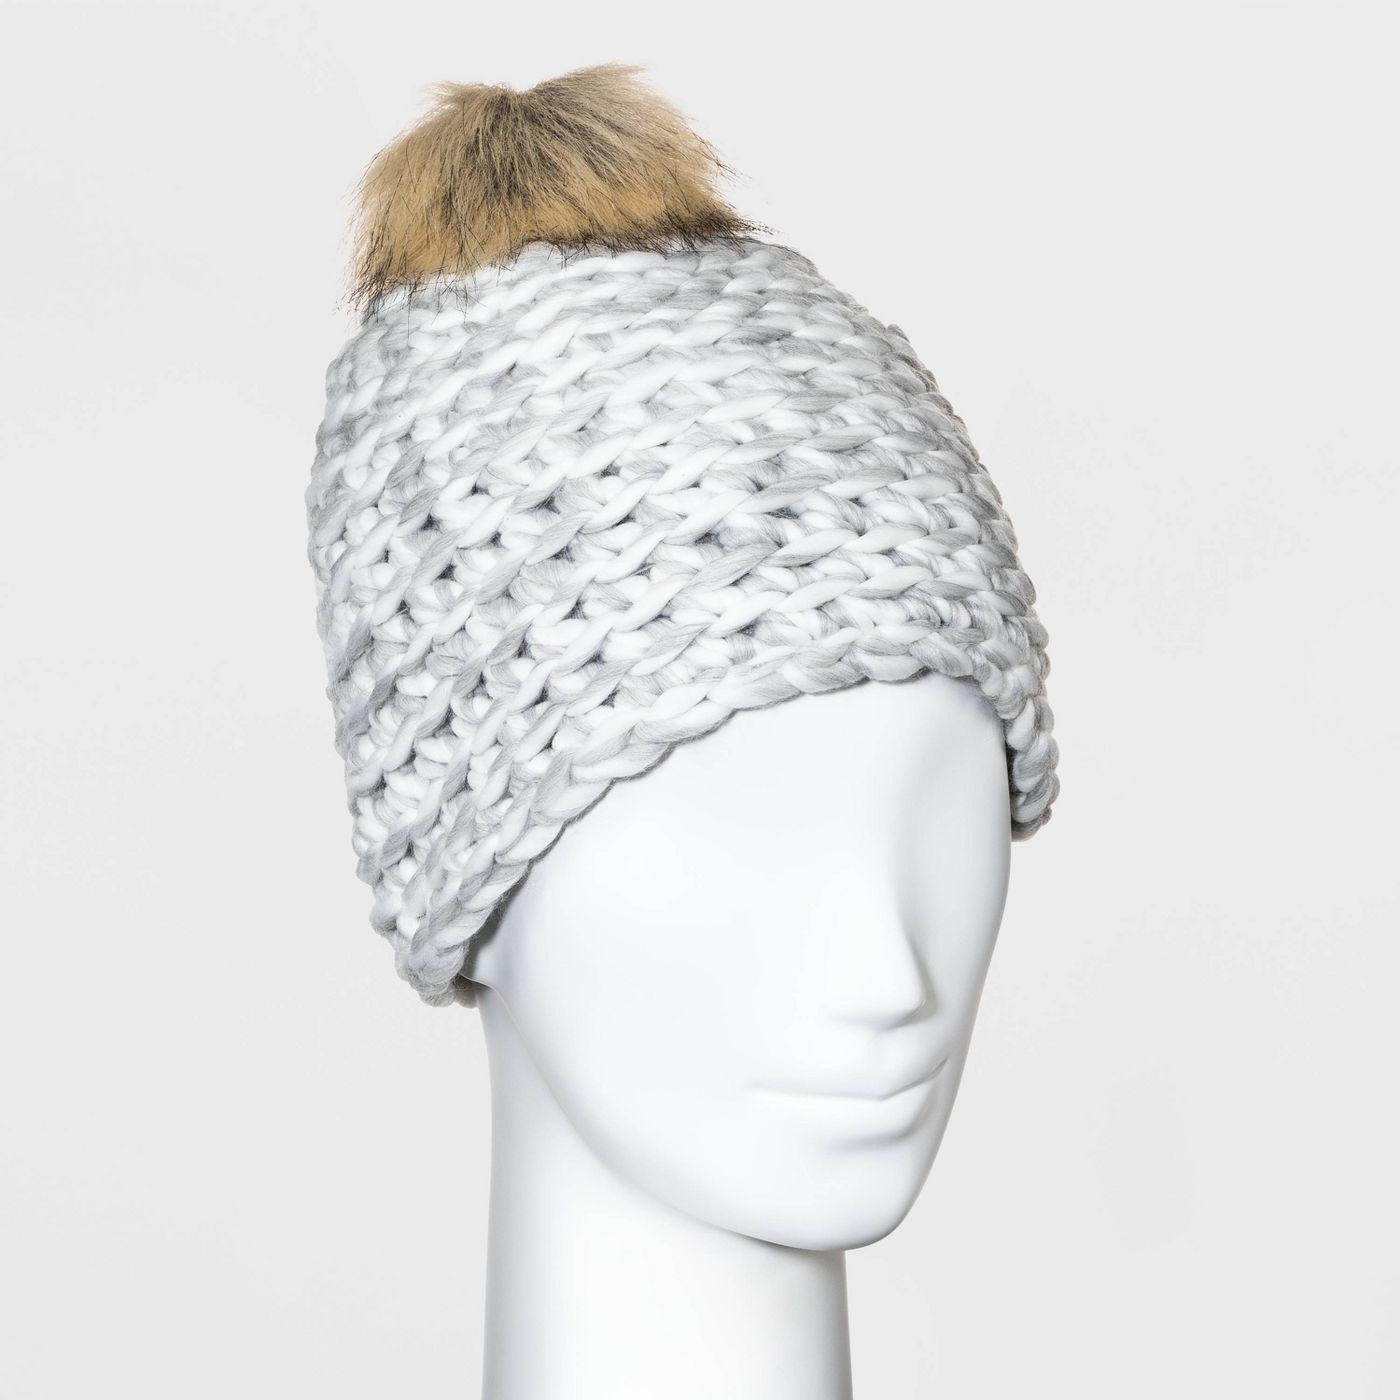 mannequin wearing a gray hand-knit pom beanie